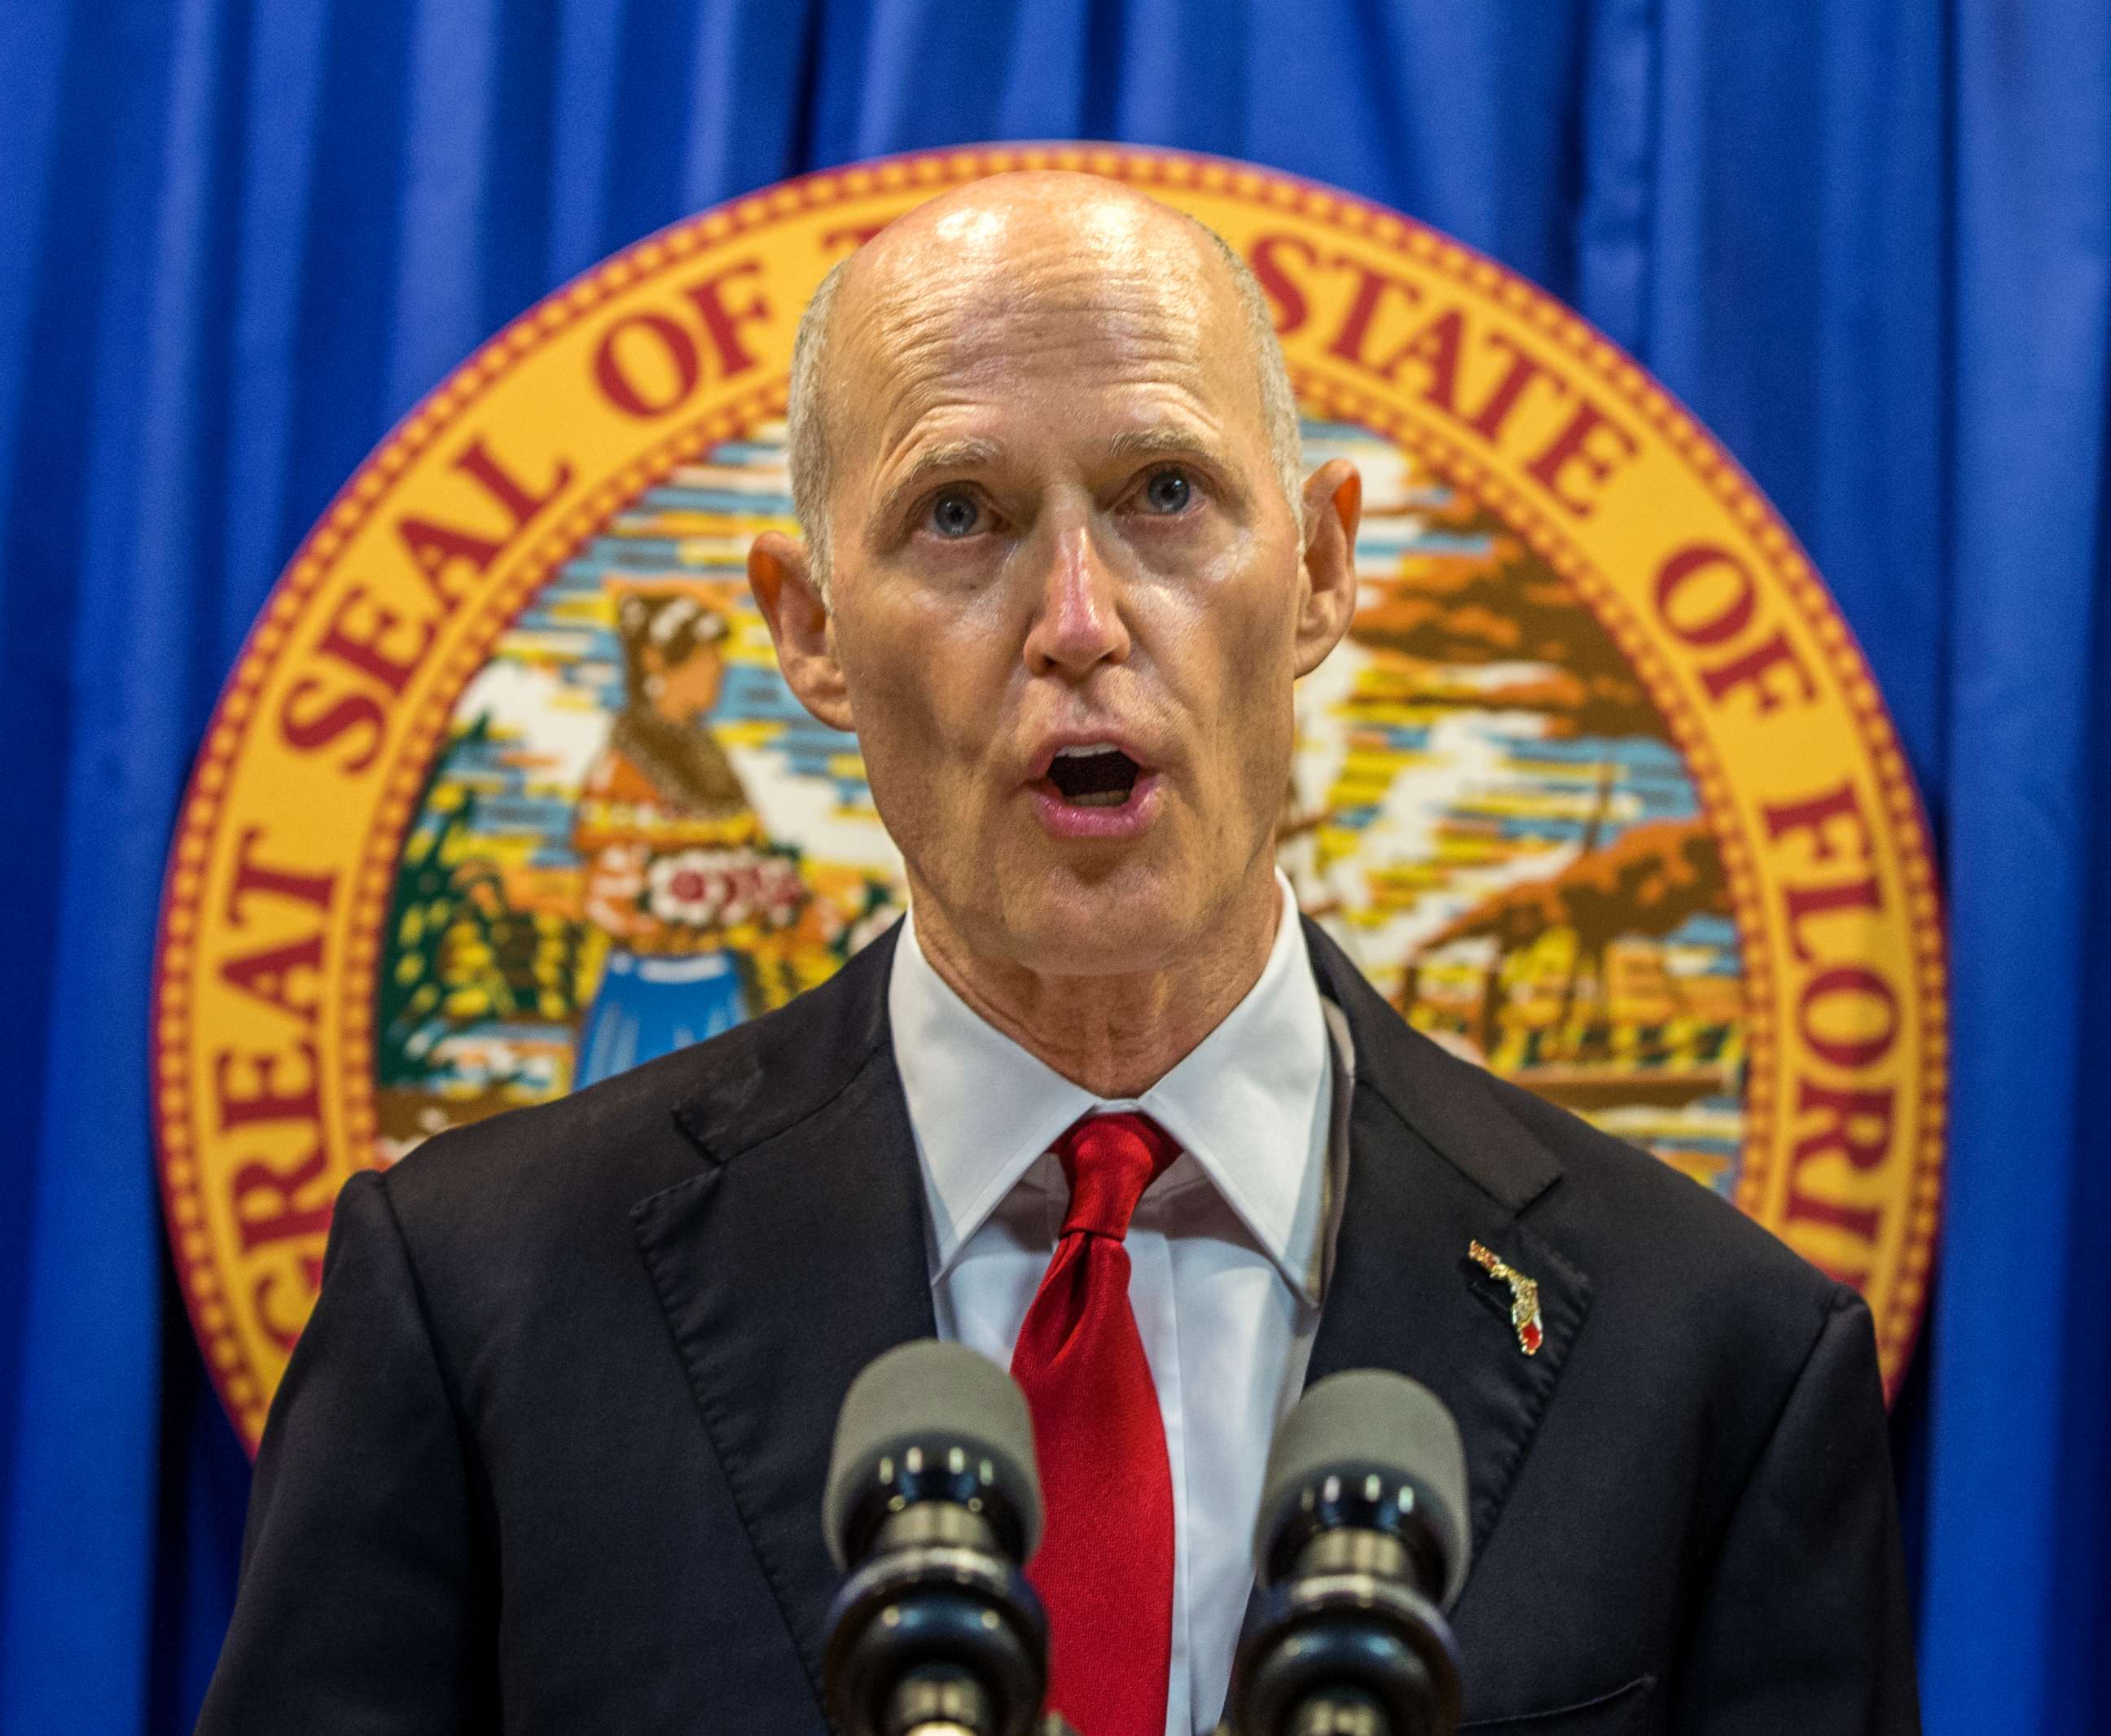 PHOTO: Florida Governor Rick Scott lays out his school safety proposal during a press conference at the Florida Capitol in Tallahassee, Fla., Feb 23, 2018.